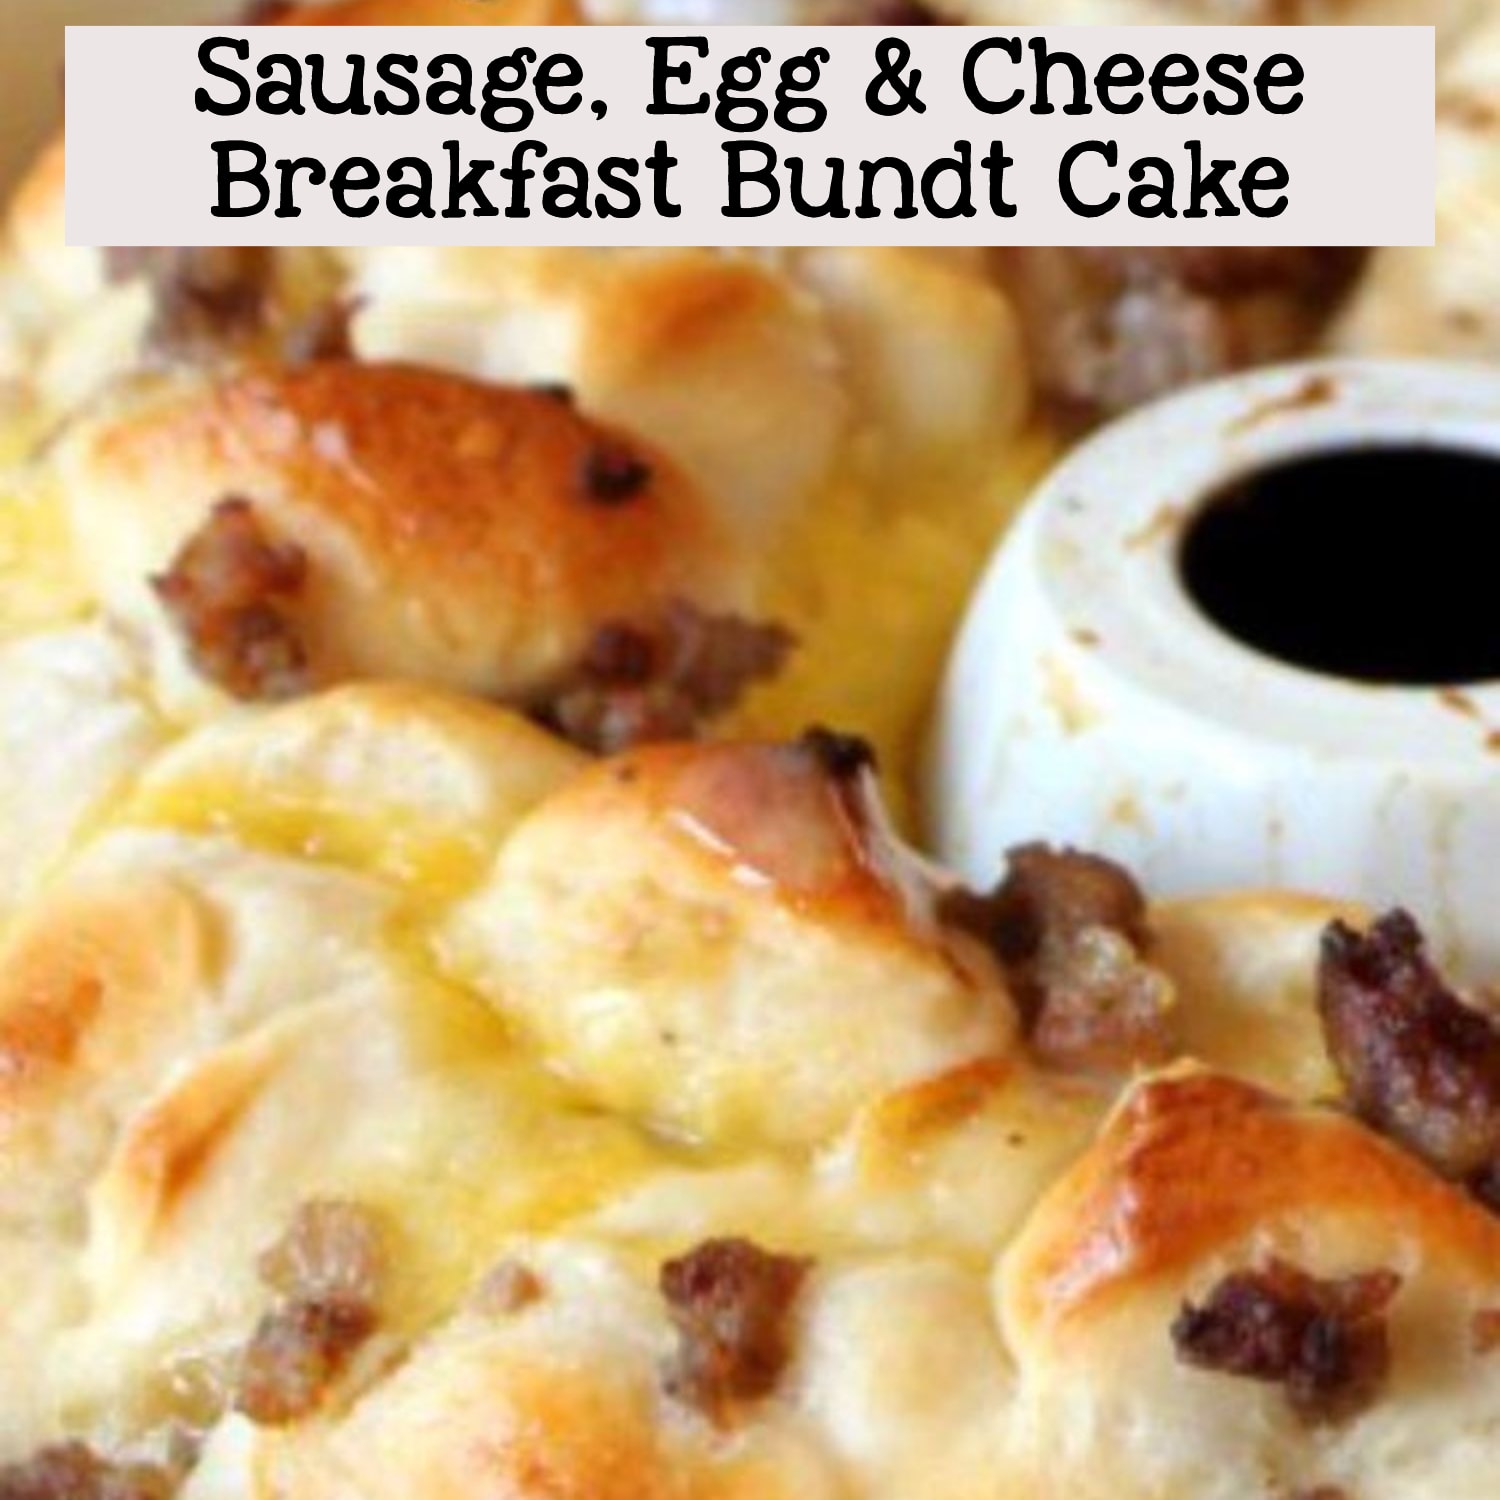 Easy make ahead breakfast and brunch food ideas for a crowd - egg, sausage and cheese breakfast casserole bundt for easy breakfast ideas for guests